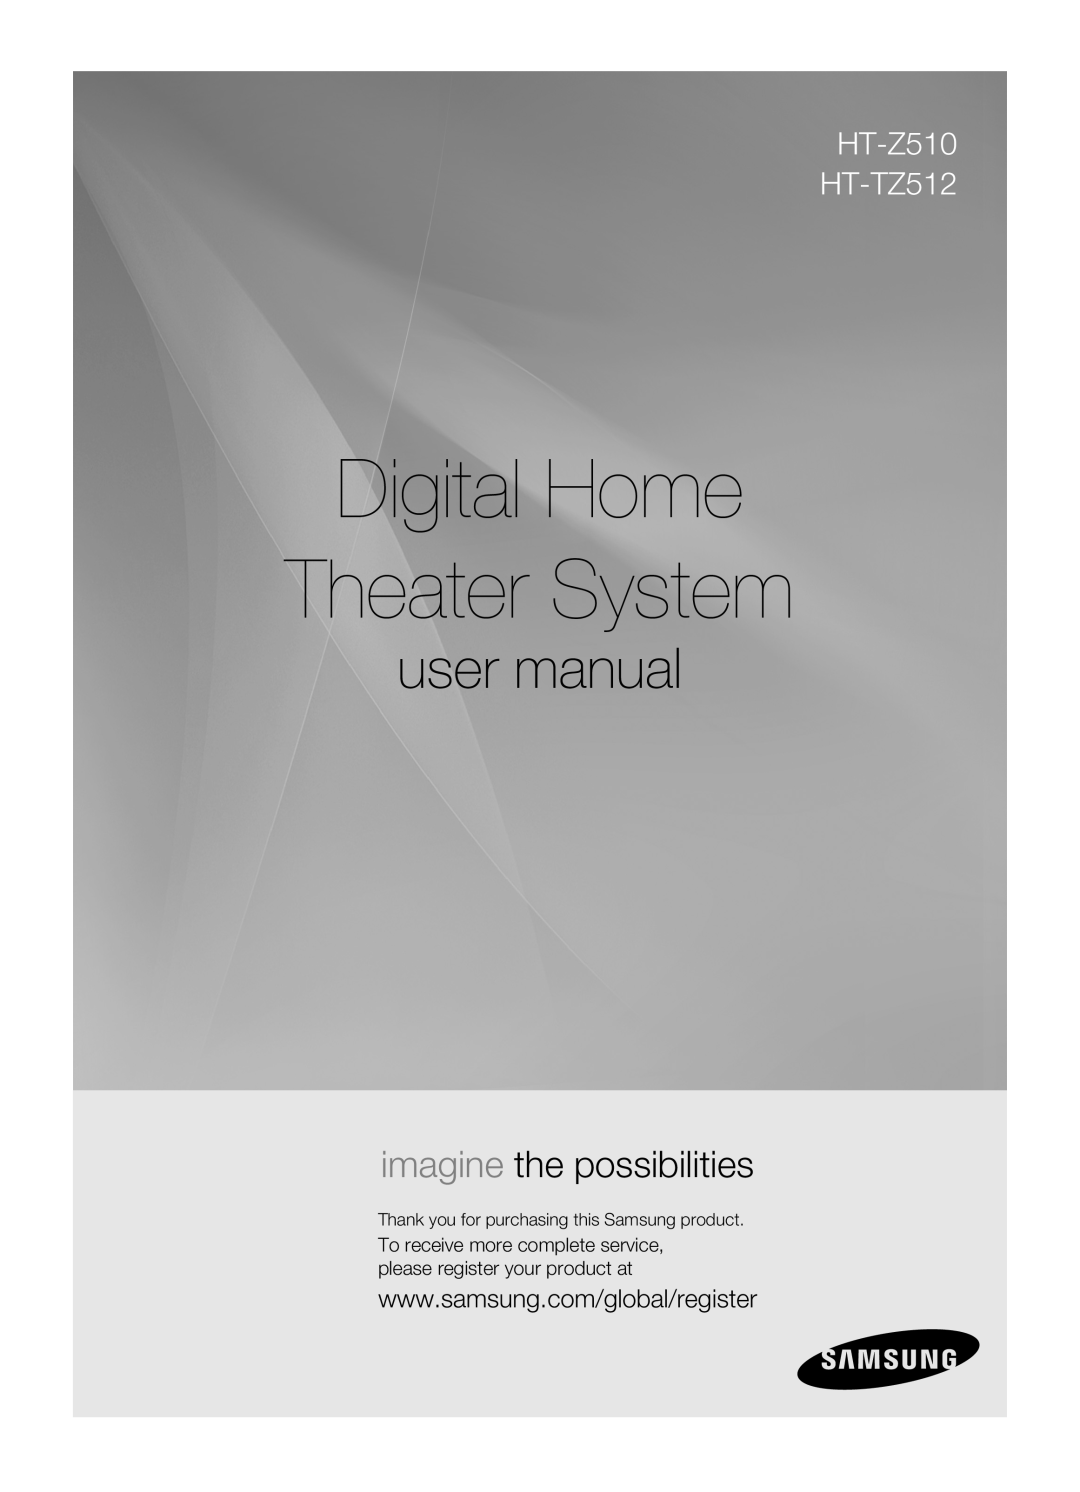 Samsung Digital Home Theater System, user manual, imagine the possibilities, HT-Z510 HT-TZ512 